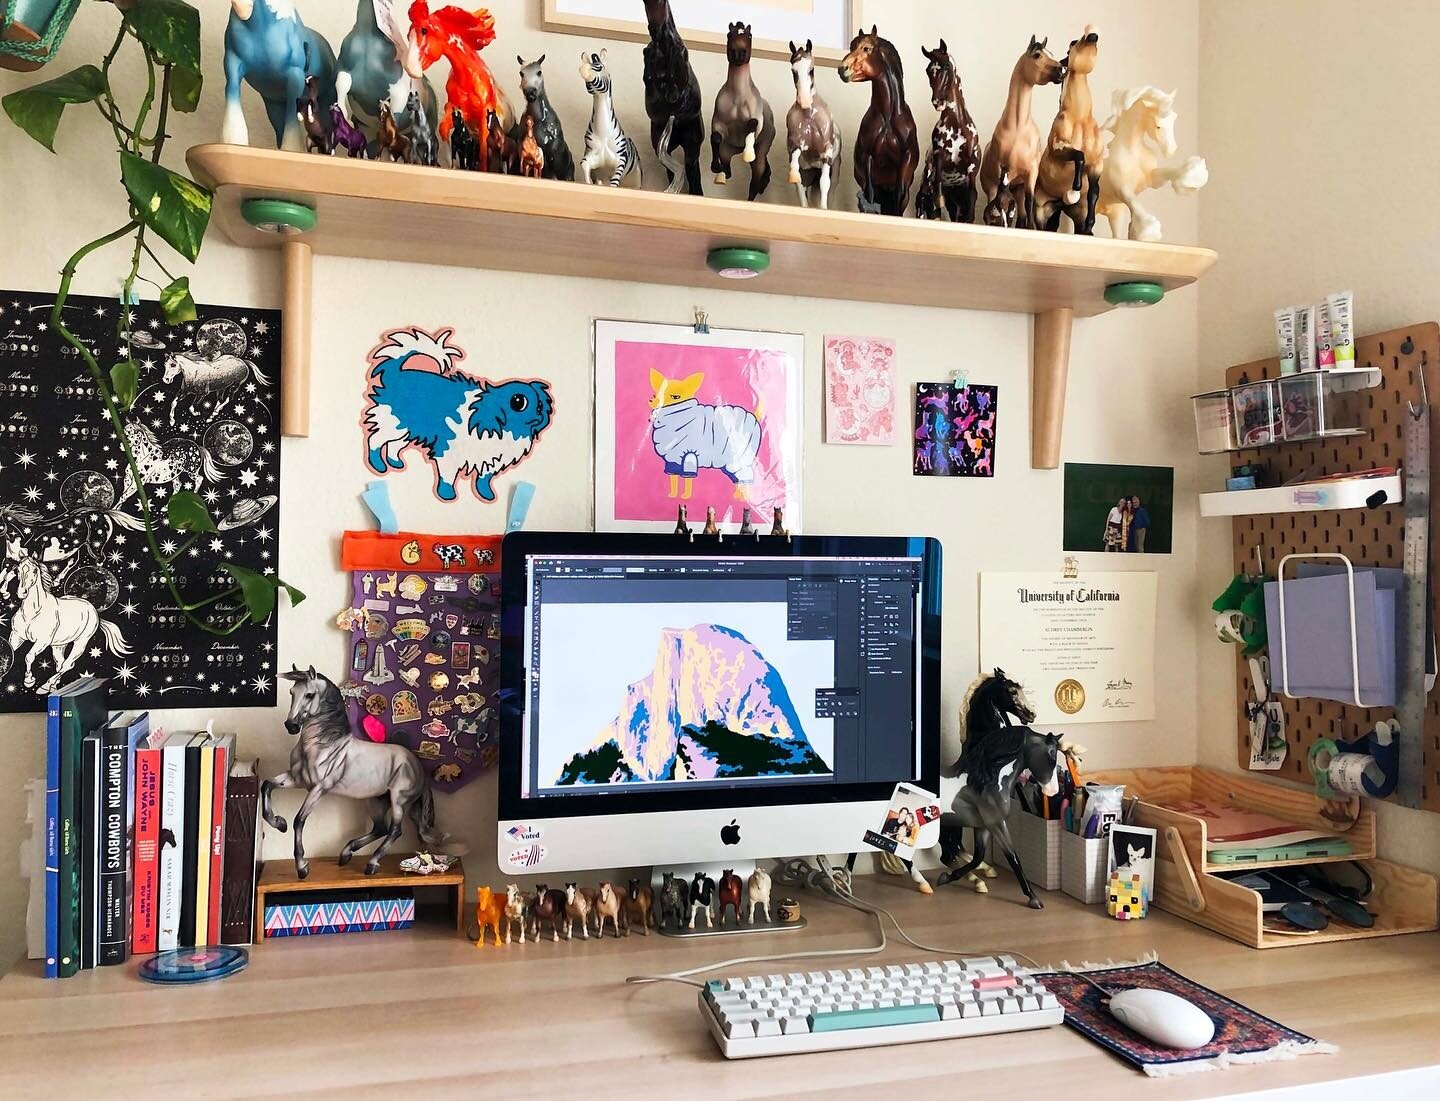 Hi here&rsquo;s a little workspace pic!! I tagged some stuff that&rsquo;s been around me for a lil while that I&rsquo;ve been getting inspired by. Desks are important make sure to take care of yours!